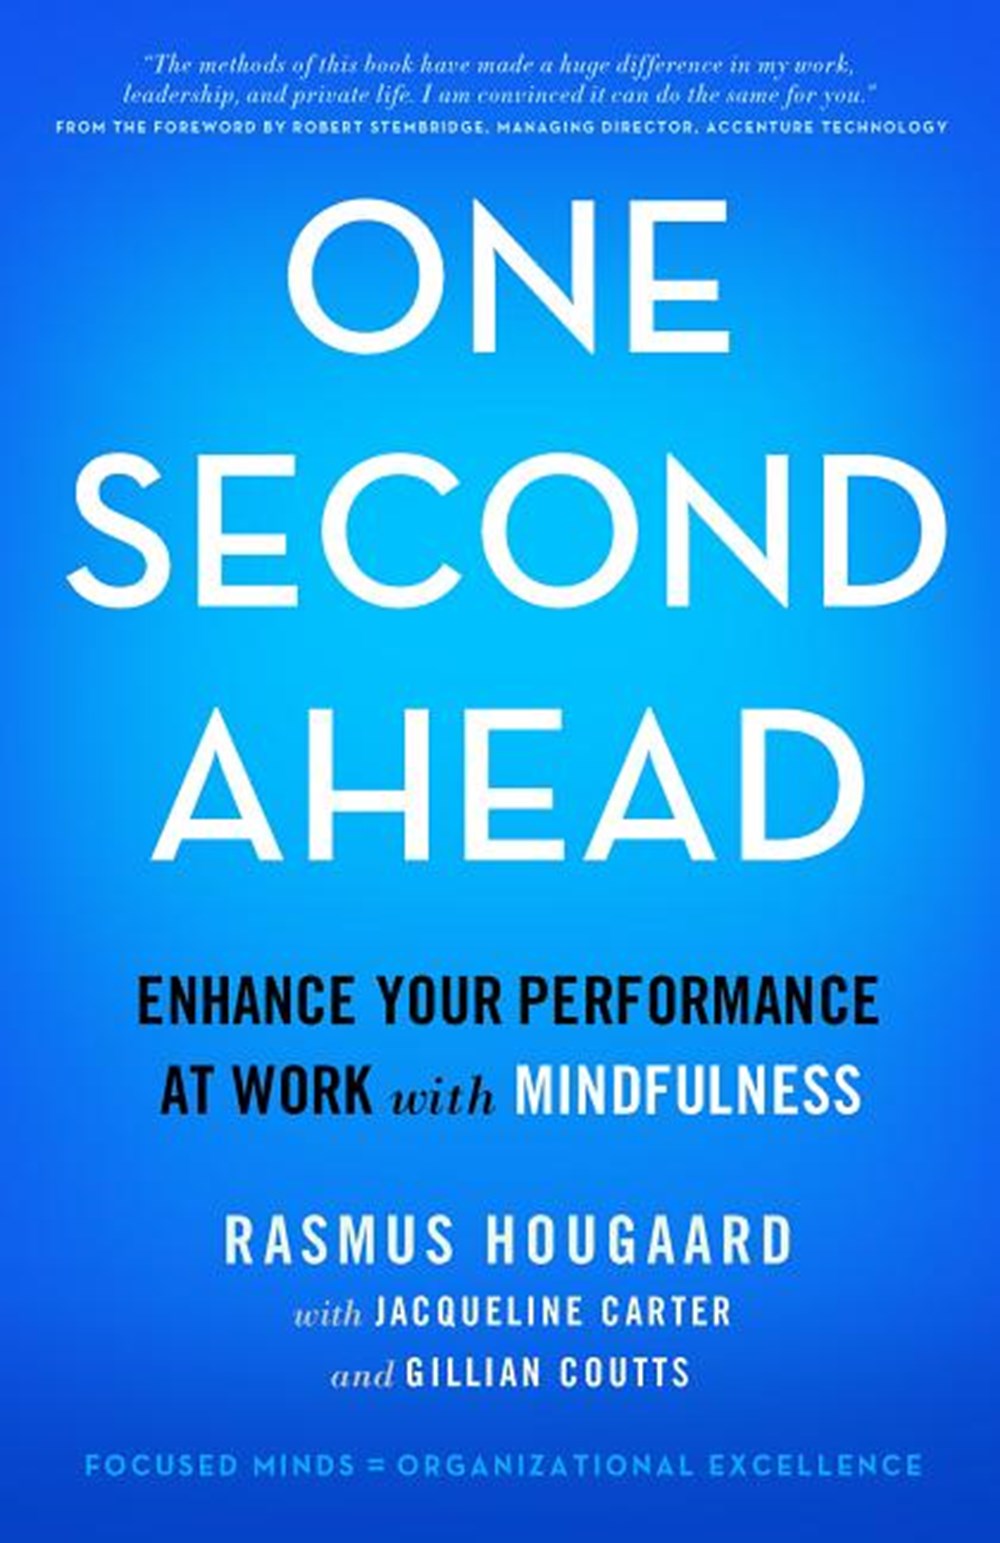 One Second Ahead Enhance Your Performance at Work with Mindfulness (2015)